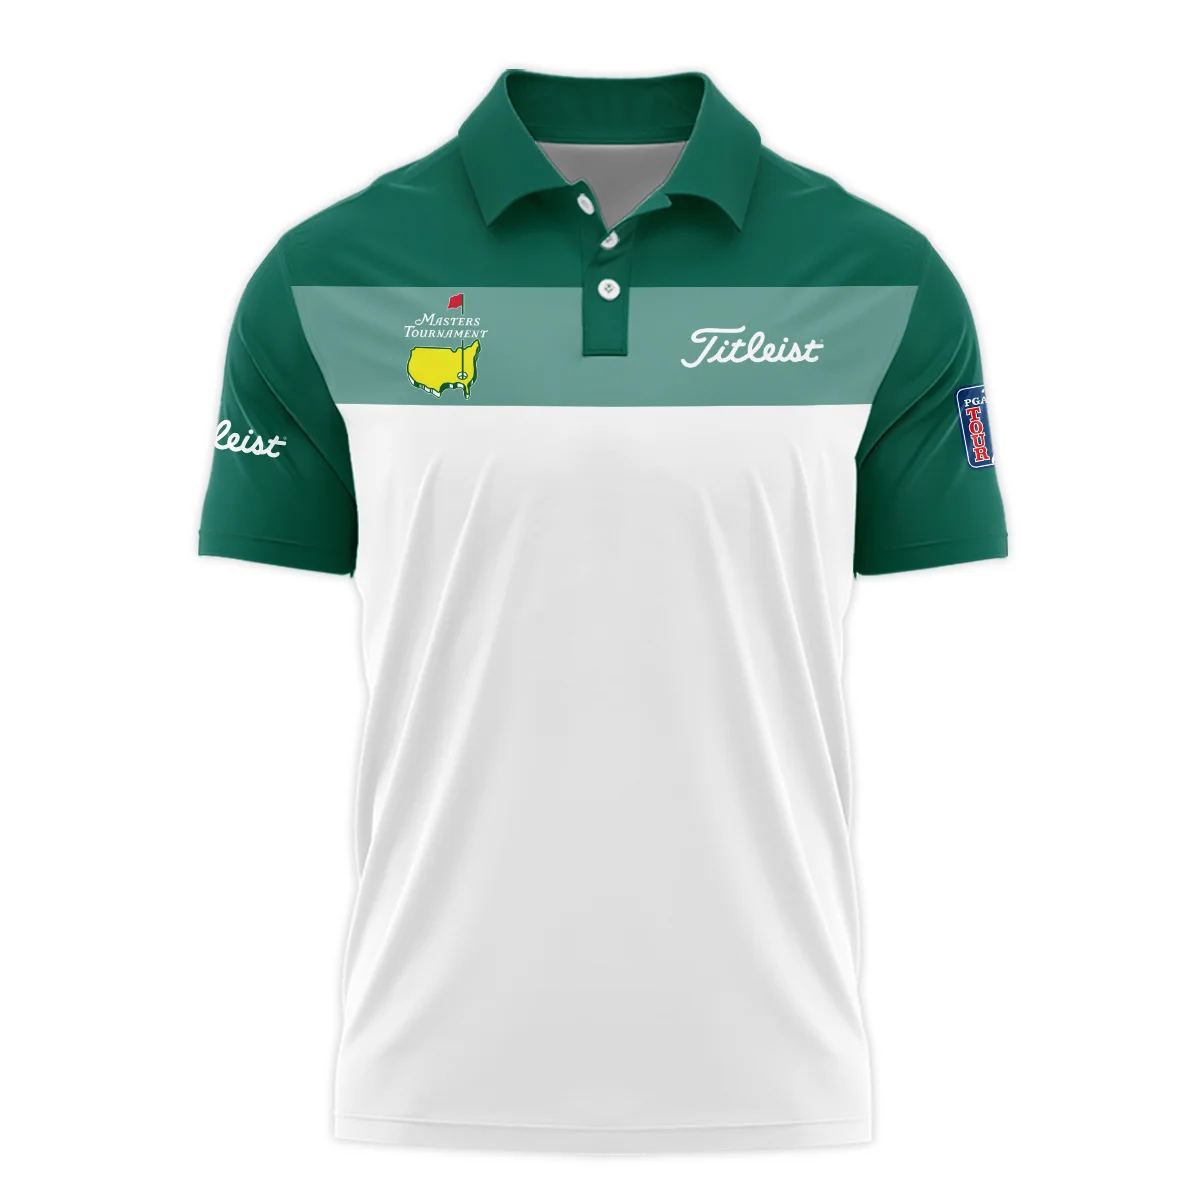 Golf Masters Tournament Titleist Long Polo Shirt Sports Green And White All Over Print Long Polo Shirt For Men